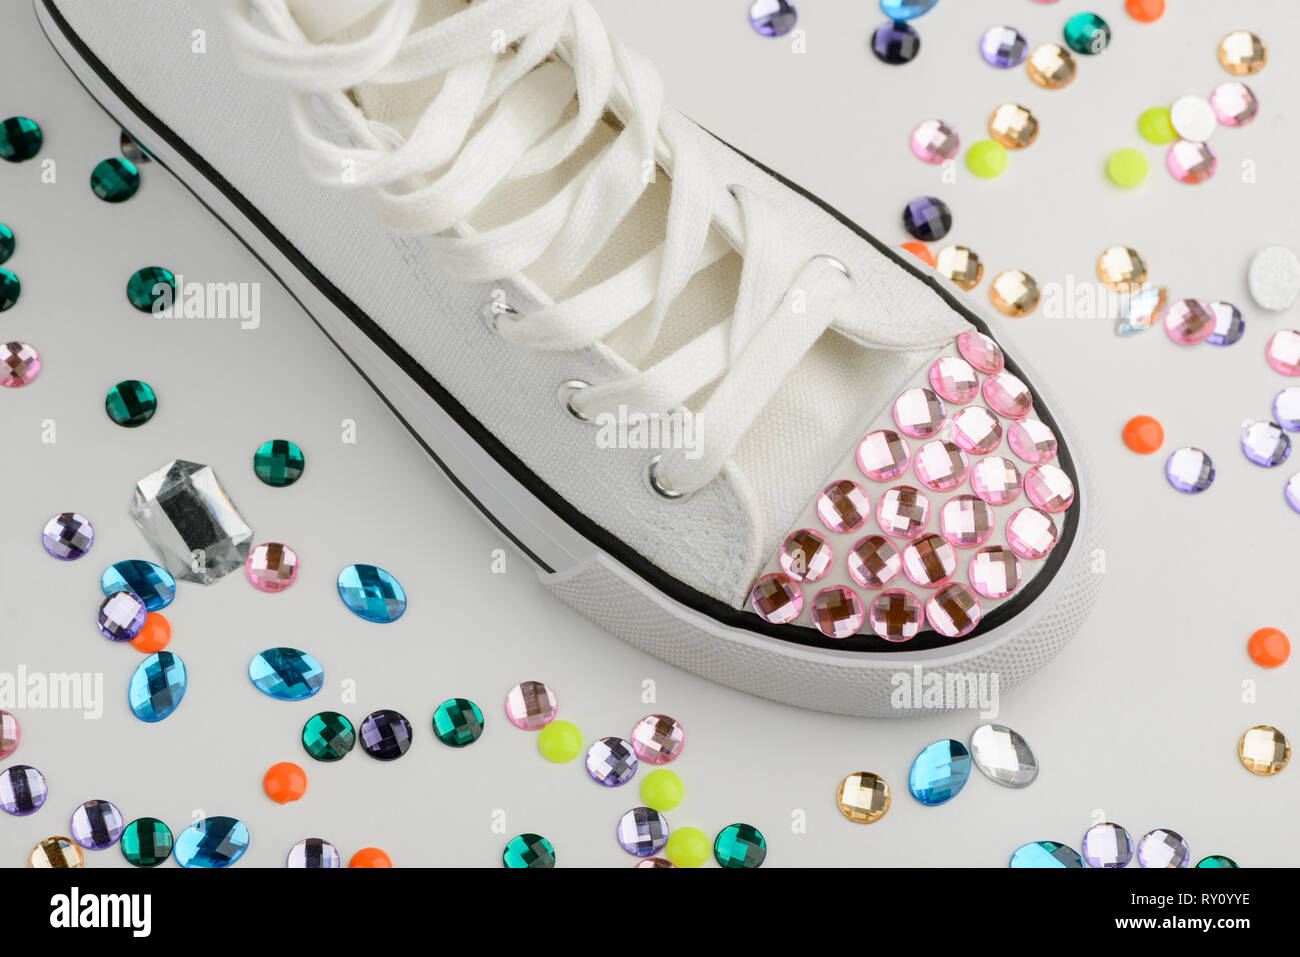 Sneaker toe cup with rhinestones Stock Photo